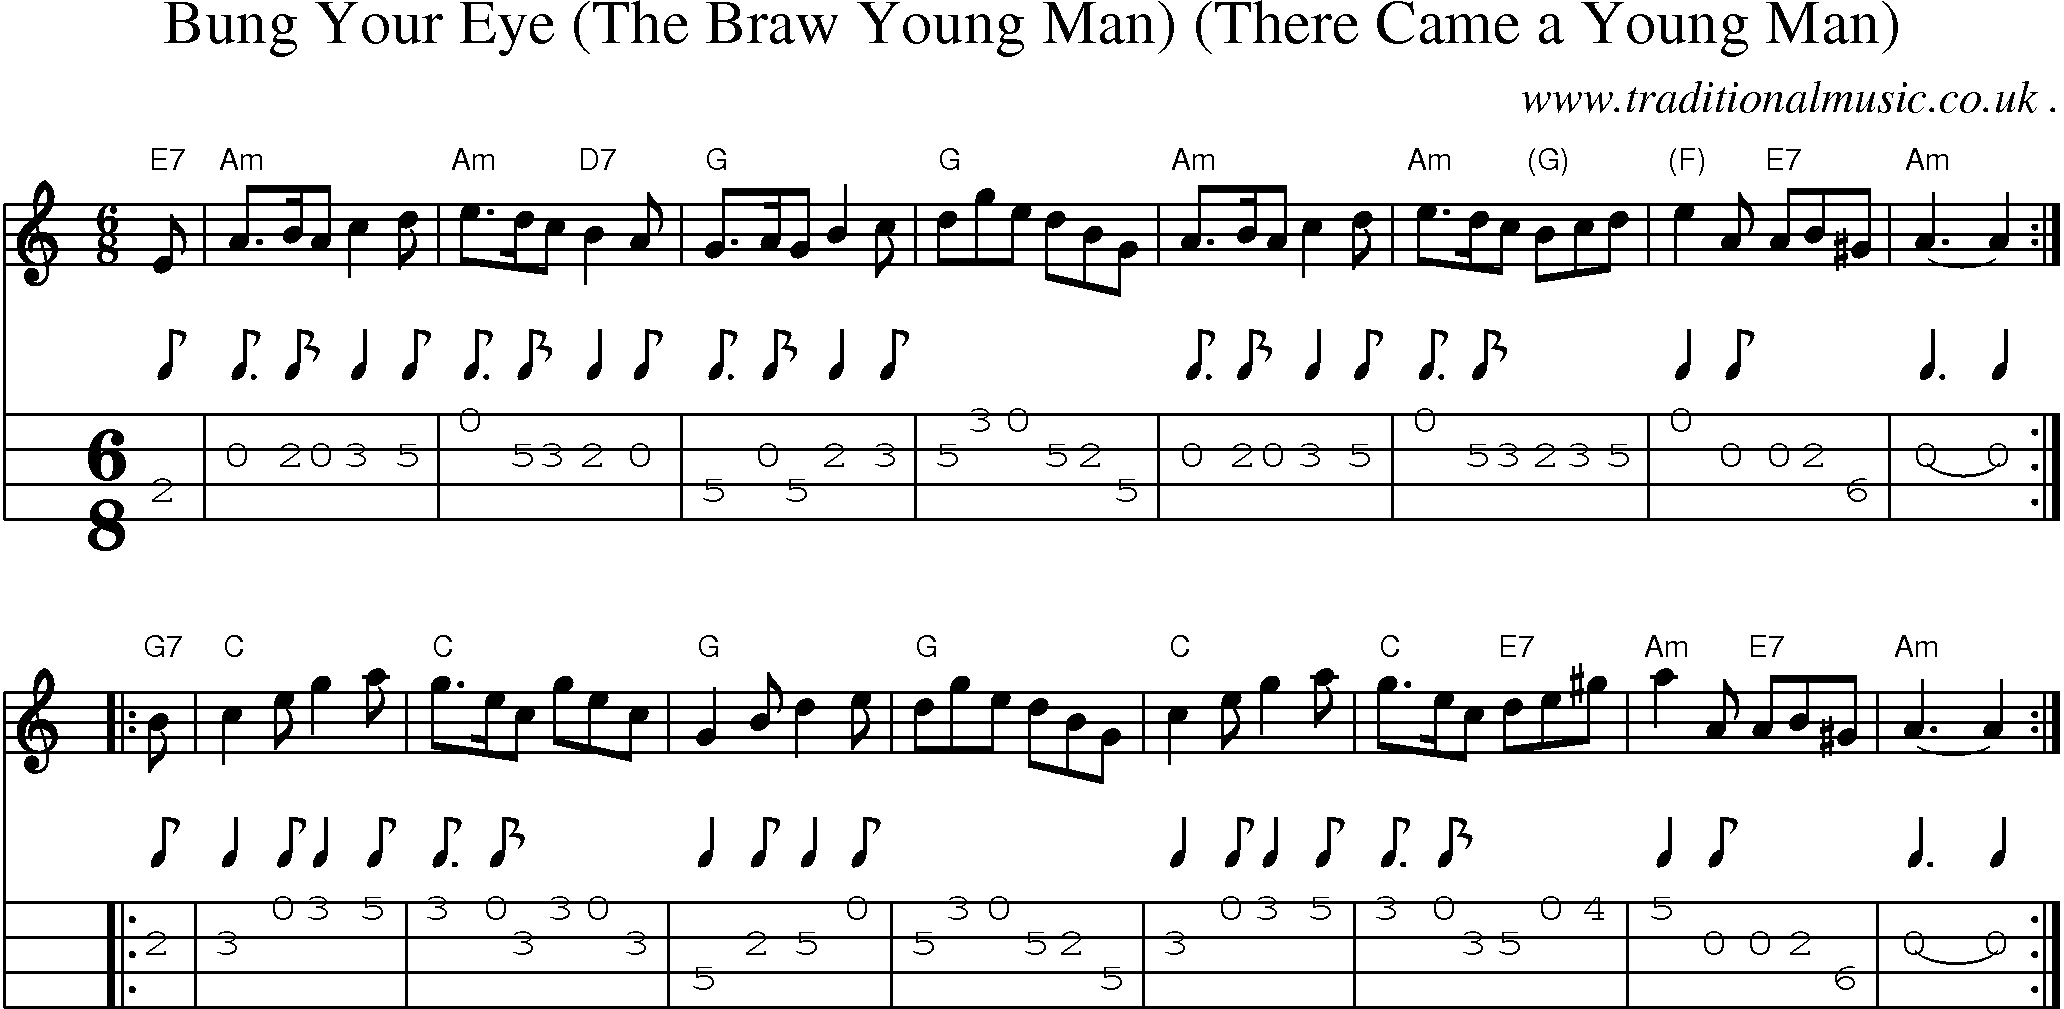 Sheet-music  score, Chords and Mandolin Tabs for Bung Your Eye The Braw Young Man There Came A Young Man